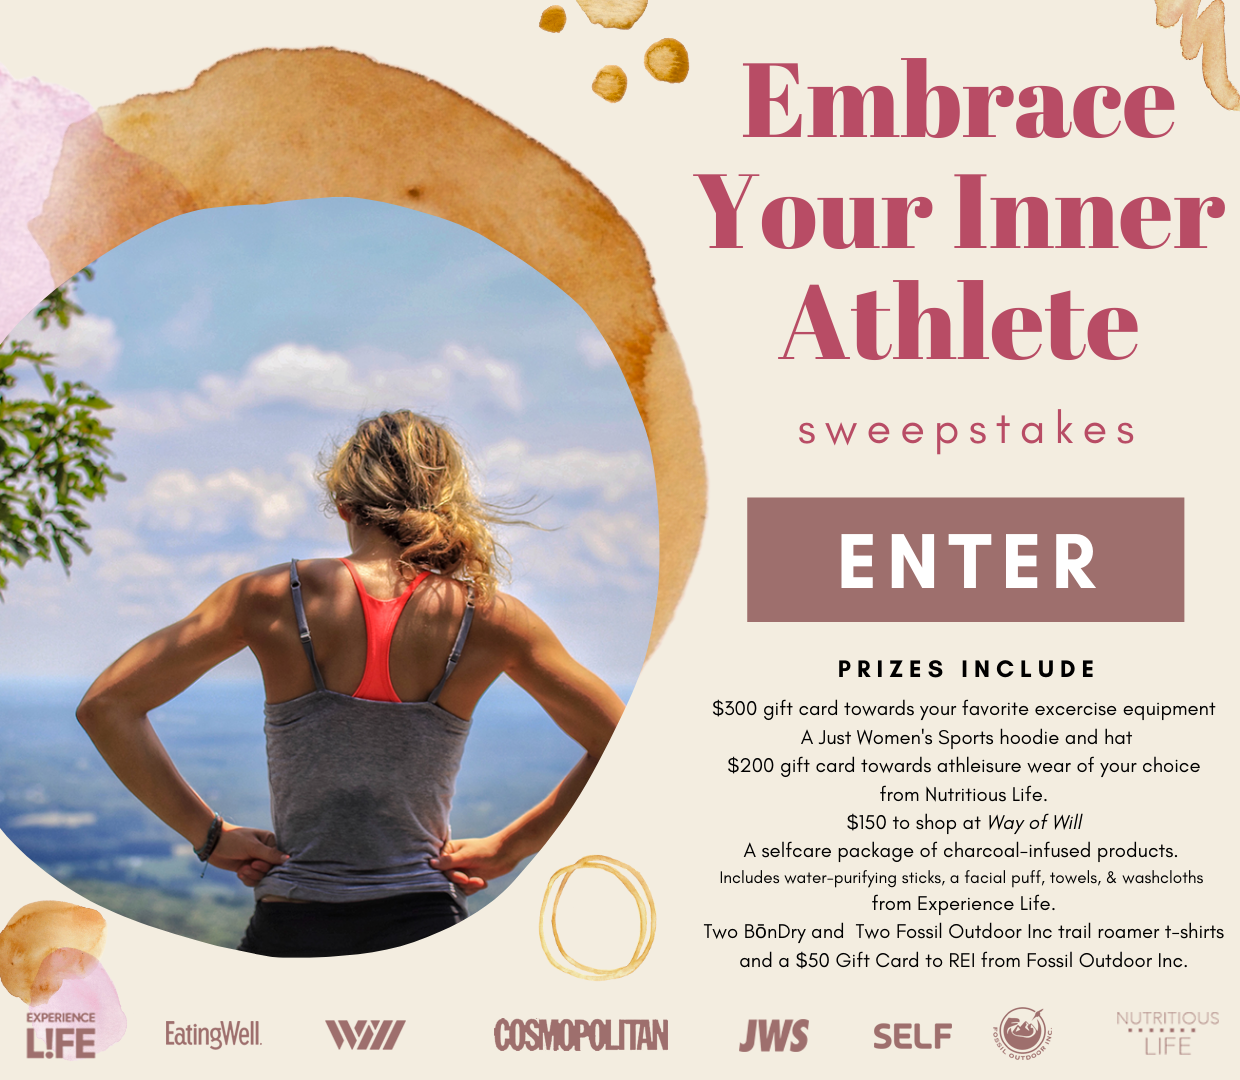 Enter for a chance to win: $300 gift card towards your favorite excercise equipment and a Just Women's Sports hoodie and hat, $200 gift card towards athleisure wear of your choice from Nutritious Life, $150 to shop at Way of Will - a natural lifestyle brand designed for those who lead an active life, A selfcare package of charcoal-infused products. Includes water-purifying sticks, a facial puff, towels, and washcloths from Experience Life, Two BōnDry and  Two Fossil Outdoor Inc trail roamer t-shirts and a $50 Gift Card to REI from Fossil Outdoor Inc. 